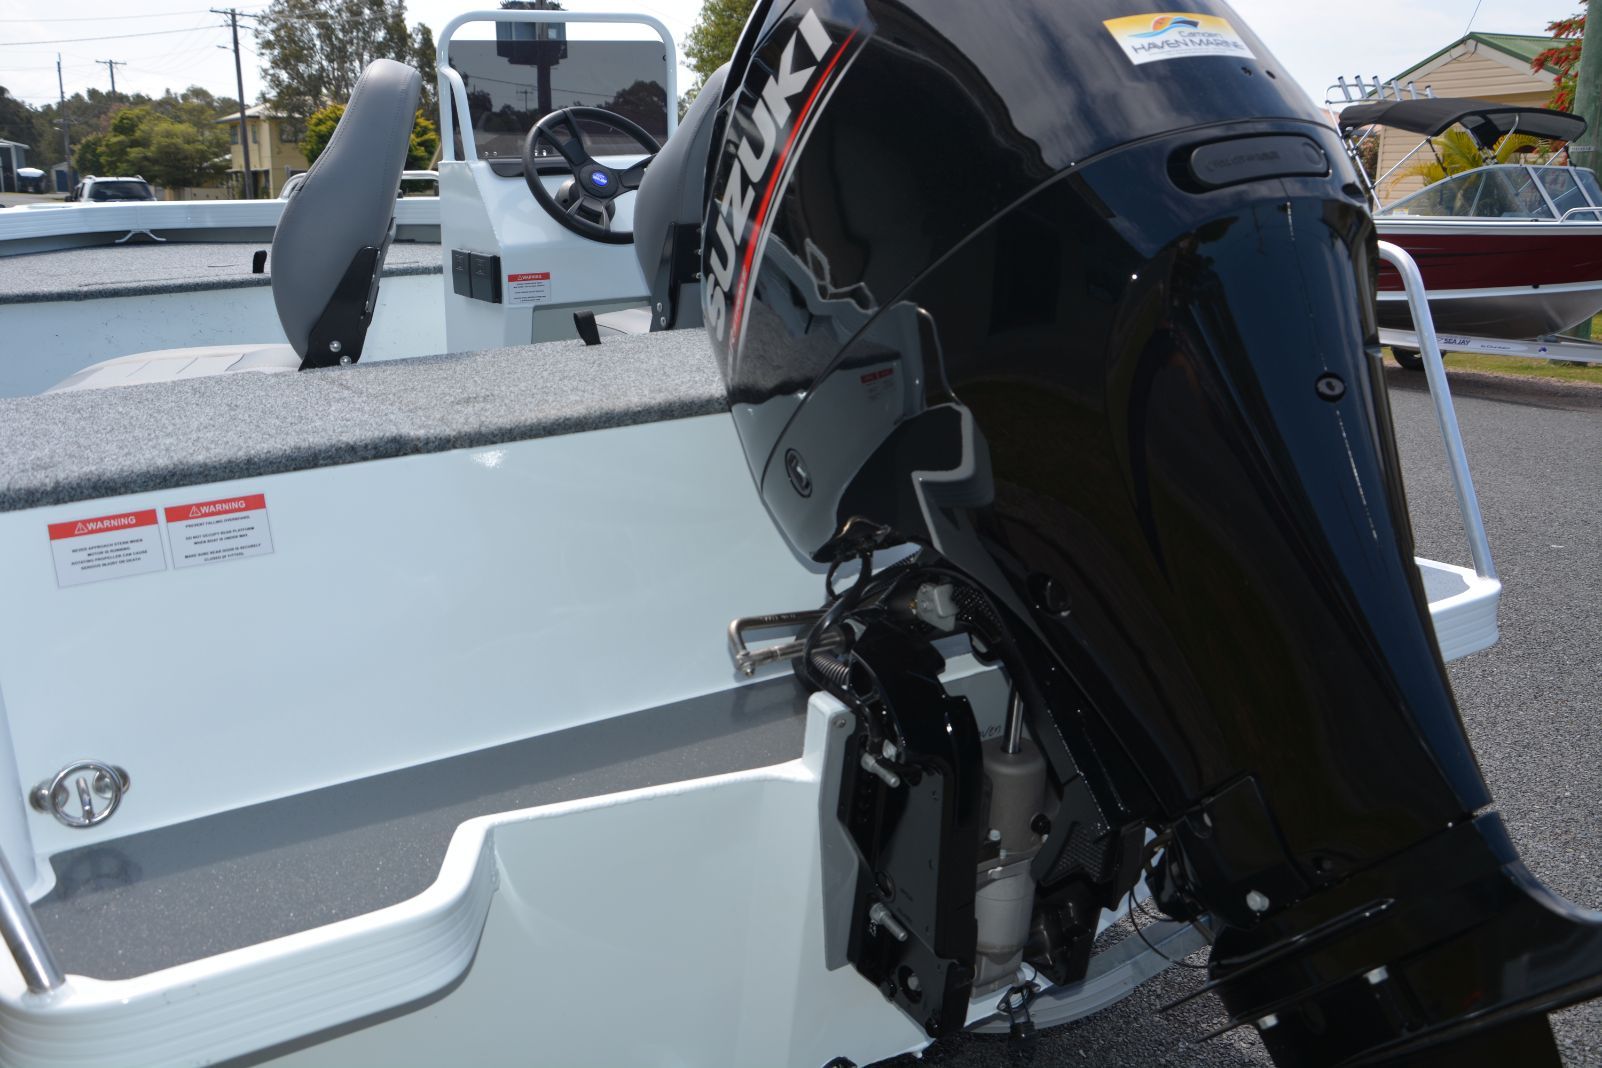 Sea Jay 458 Stealth — Boat Sales in Port Macquarie, NSW